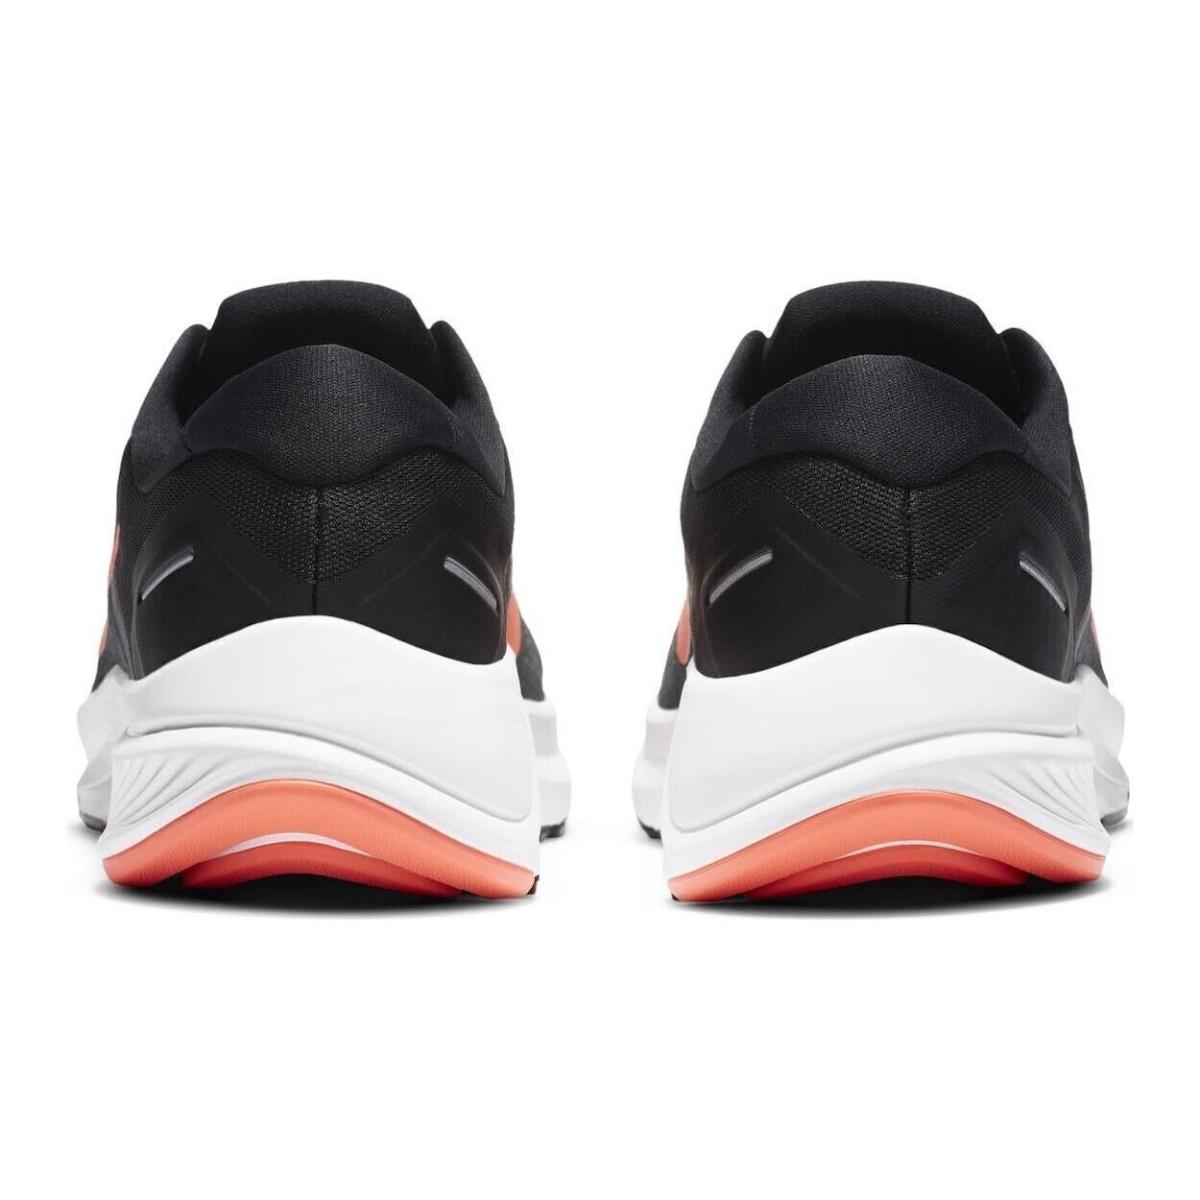 Nike shoes Air Zoom Structure - Bright Mango-Black 3